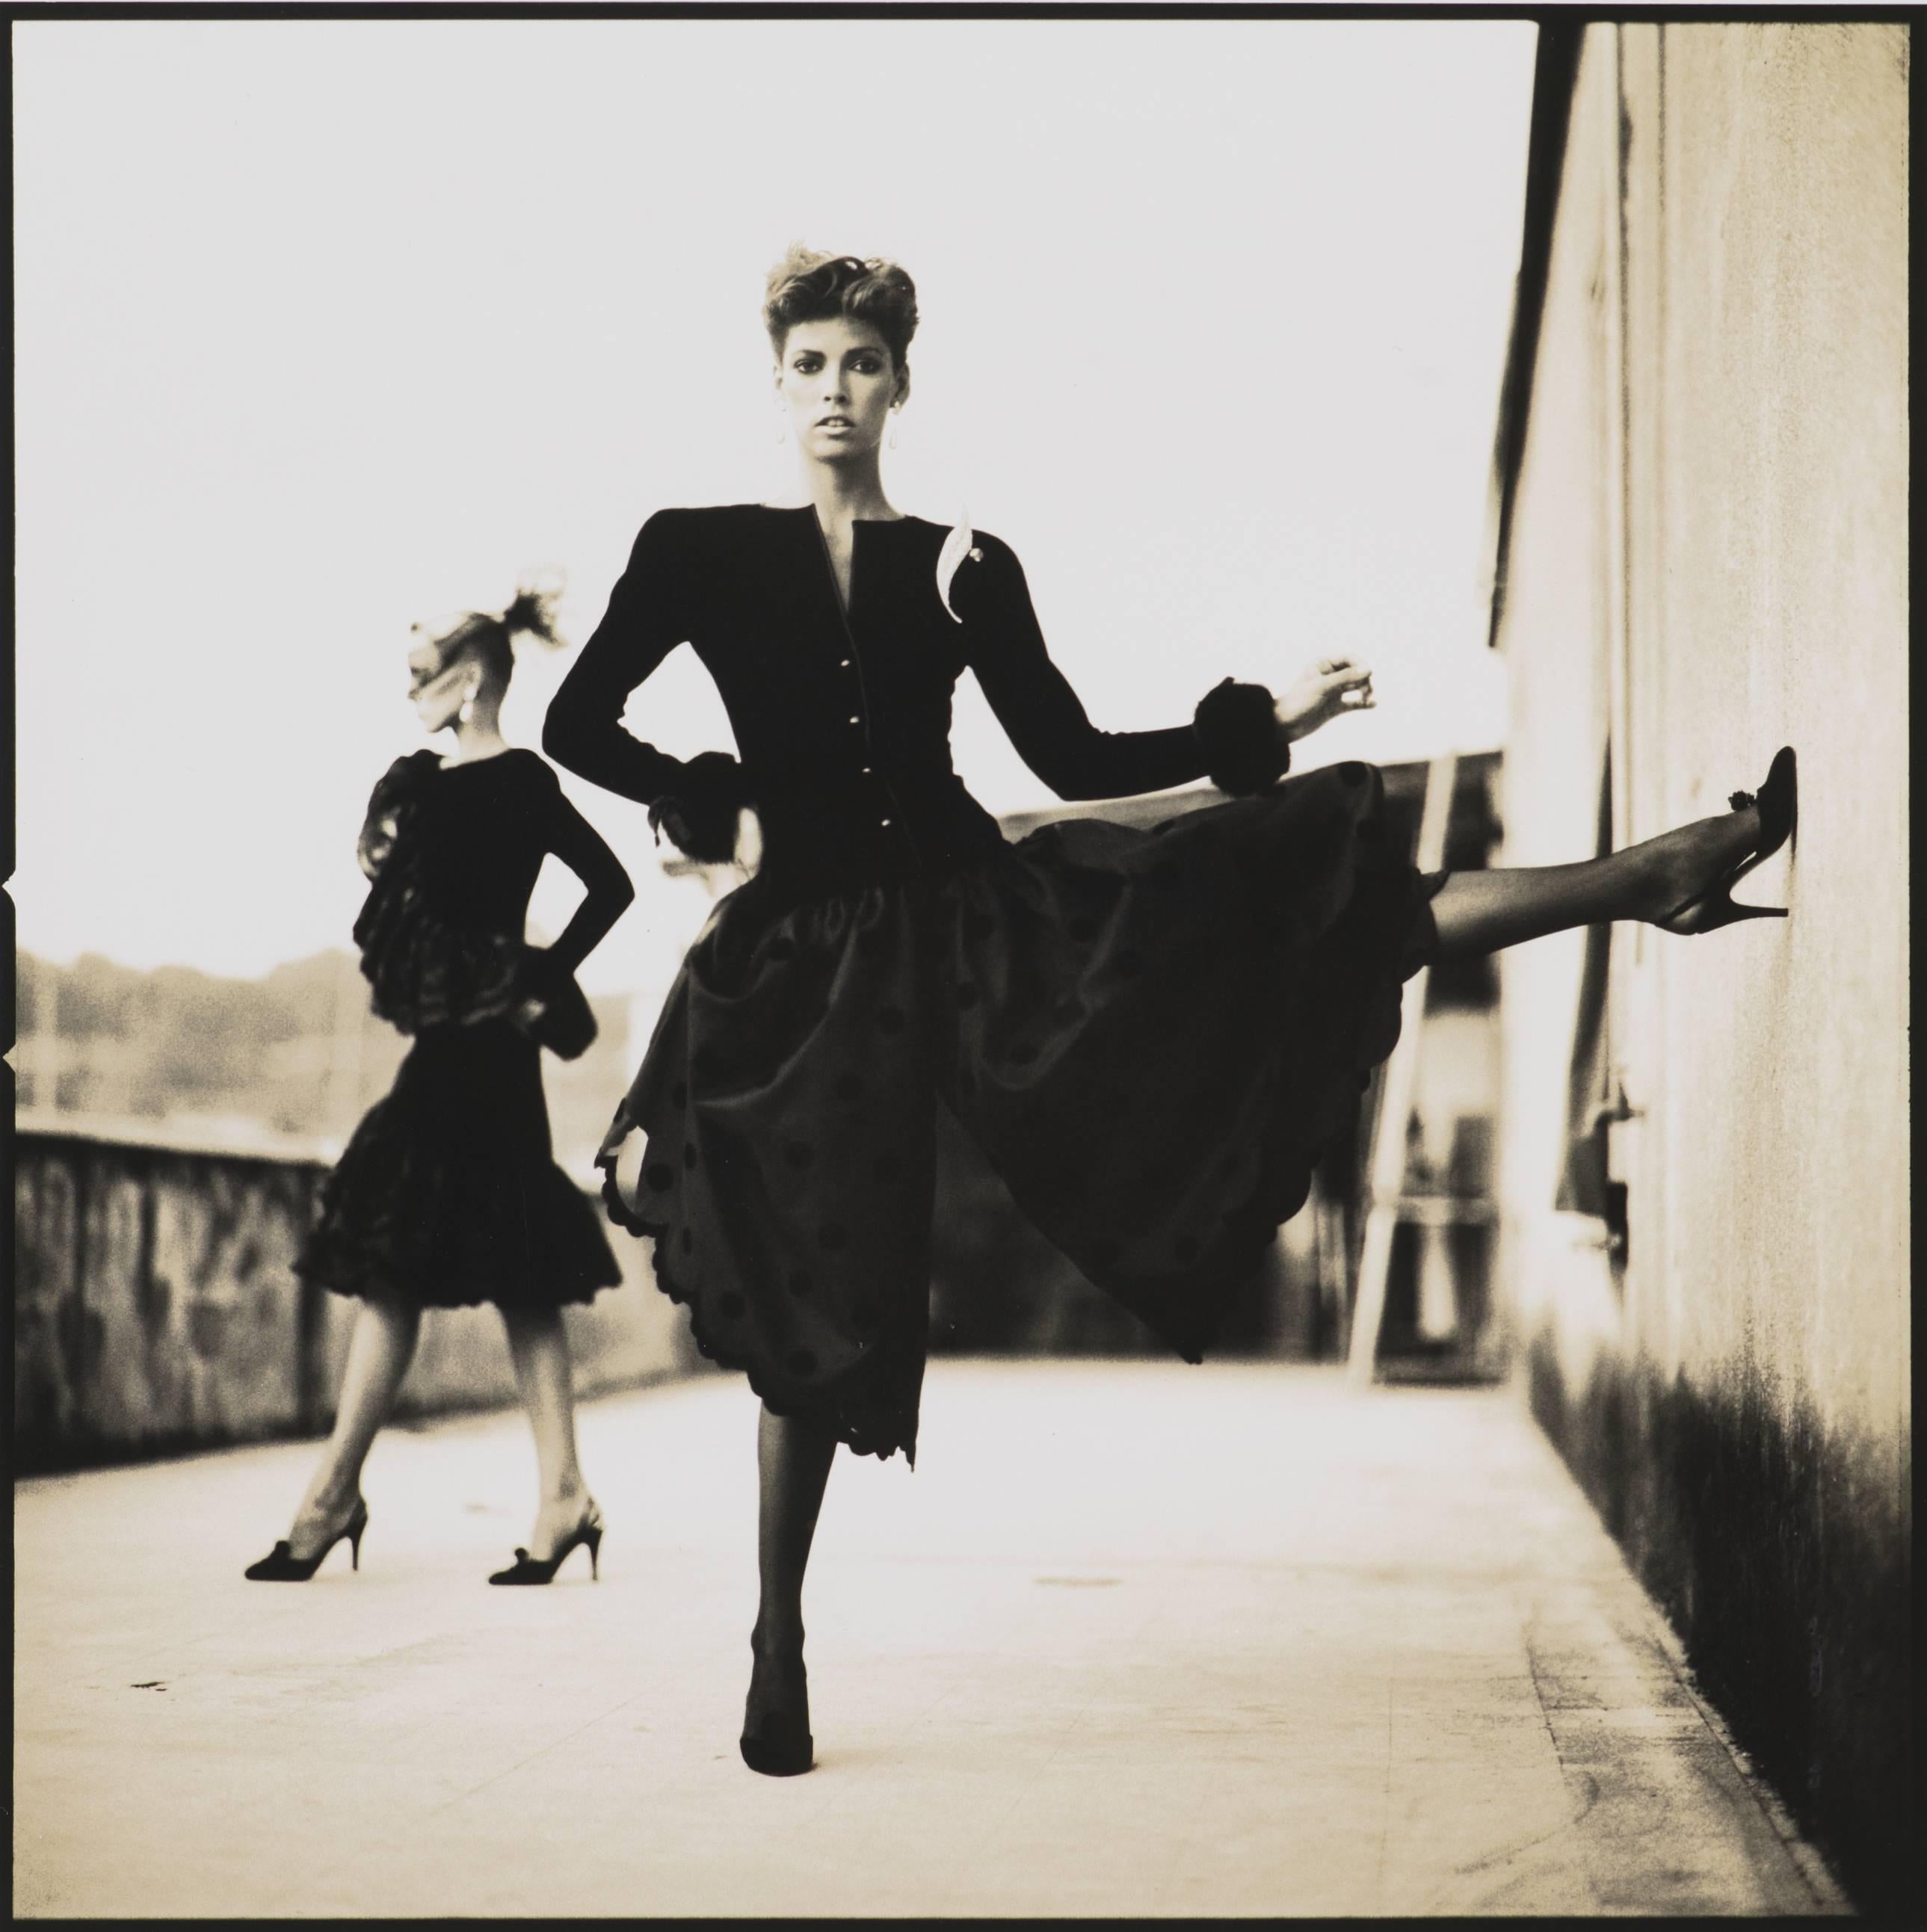 Dimension:
cm. 23,8 x 23,8
cm. 42,3 x 42,3 with frame
stamp of the copyright of Arthur Elgort verso
Fashion Photography

Arthur Elgort was born in 1940 in New York City. After working as a mask at Carnegie Hall, during which he made his first shots